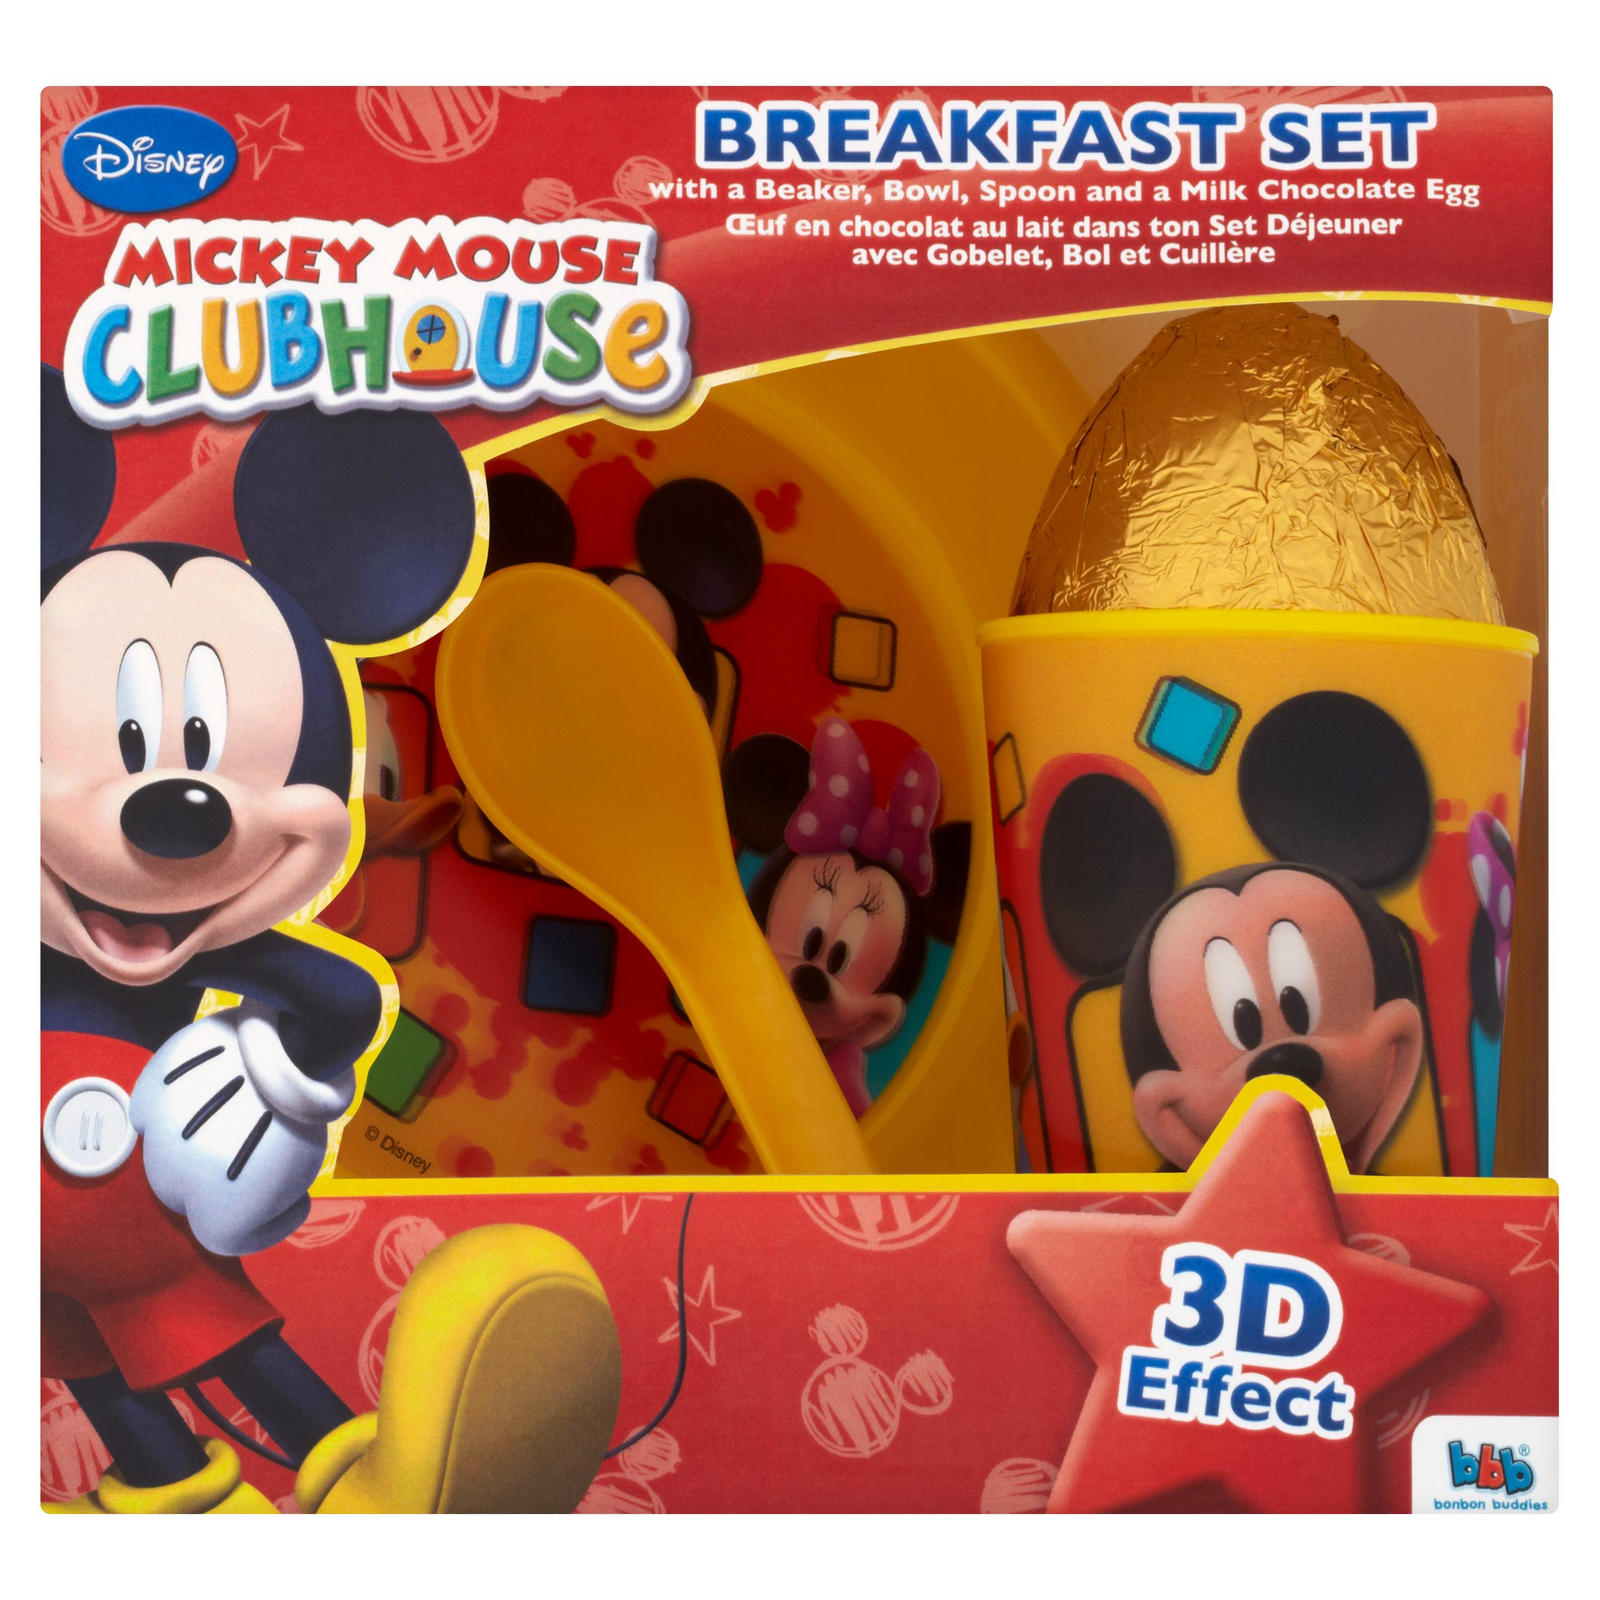 Disney Mickey Mouse Clubhouse Breakfast Set 45g | Iceland Foods